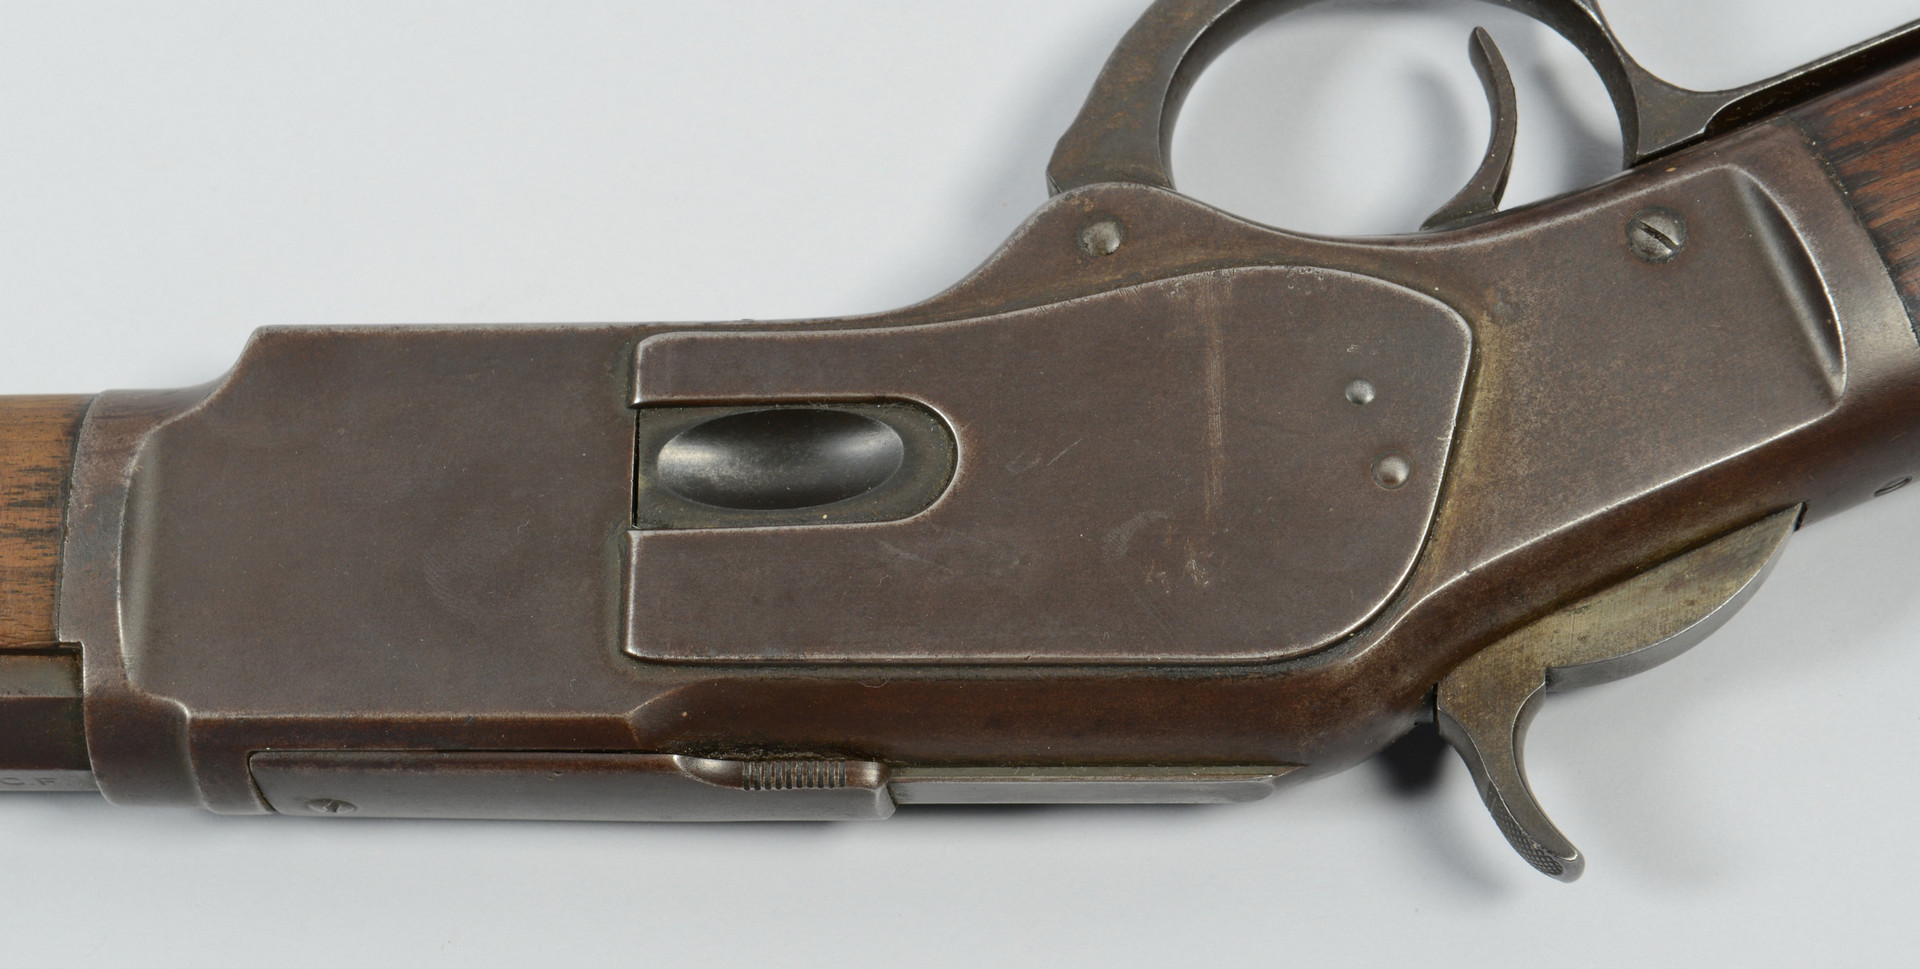 Lot 413: 1873 Winchester Rifle, .32 Cal